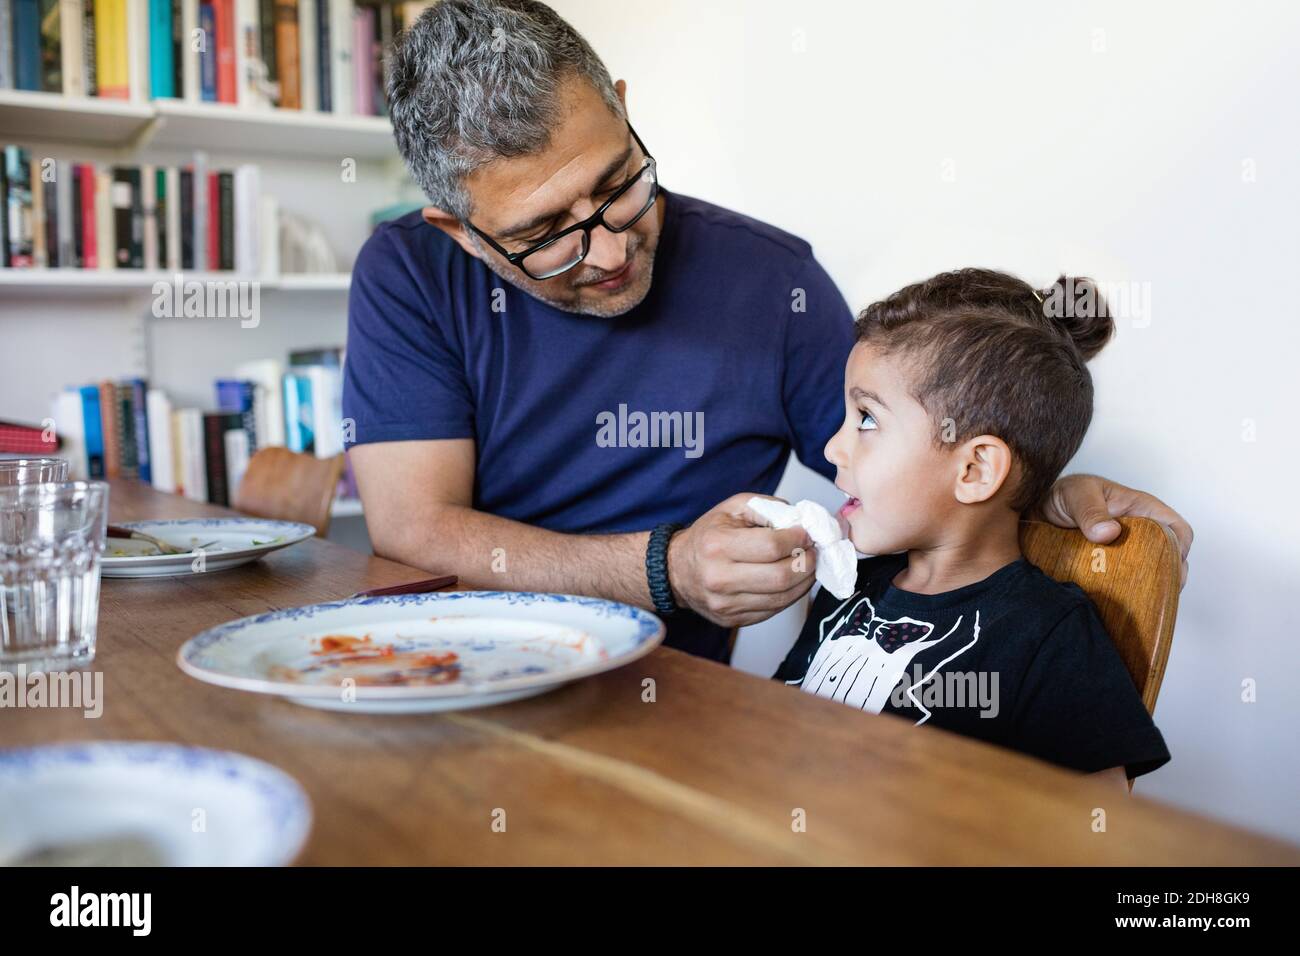 Father wiping son's mouth after lunch at dining table Stock Photo